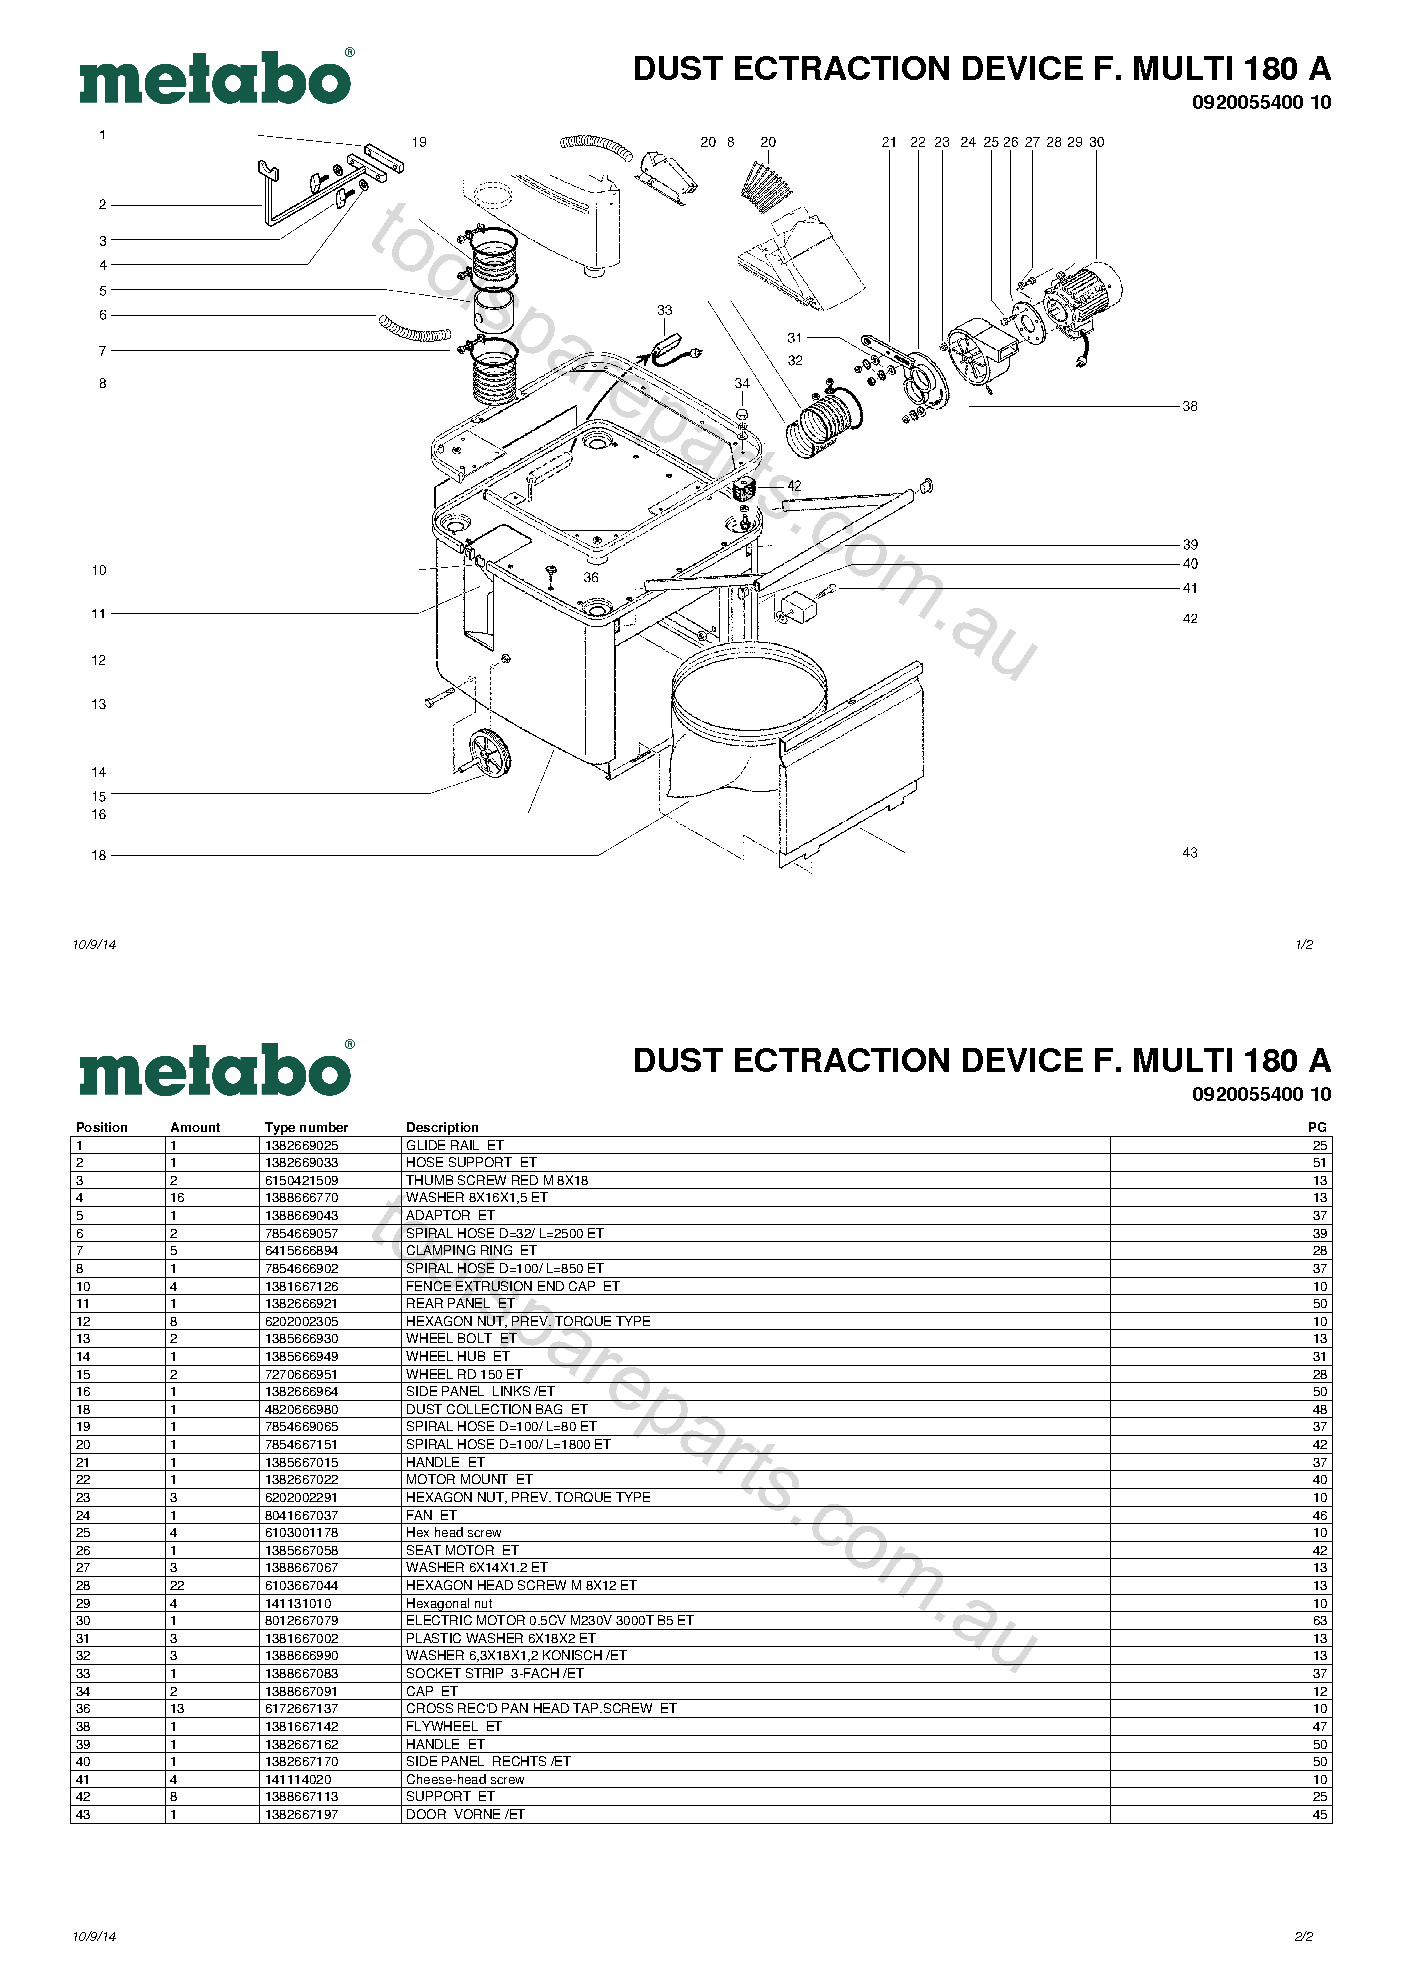 Metabo DUST ECTRACTION DEVICE F. MULTI 180 A 0920055400 10  Diagram 1